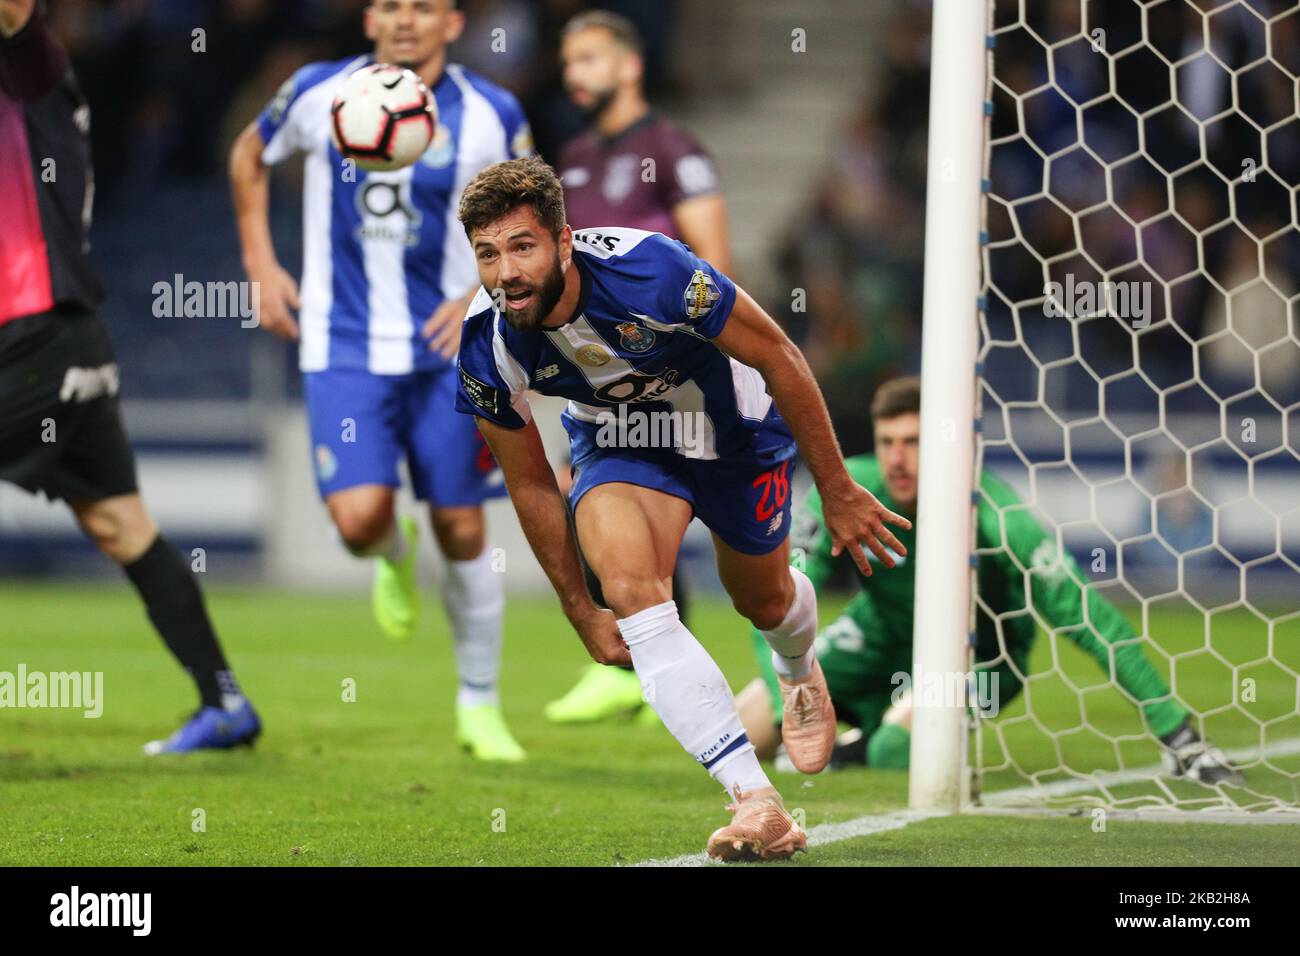 Porto's Brazilian defender Felipe (C) score a goal in action during the  Premier League 2018/19 match between FC Porto and CD Feirense, at Dragao  Stadium in Porto on October 28, 2018. (Photo